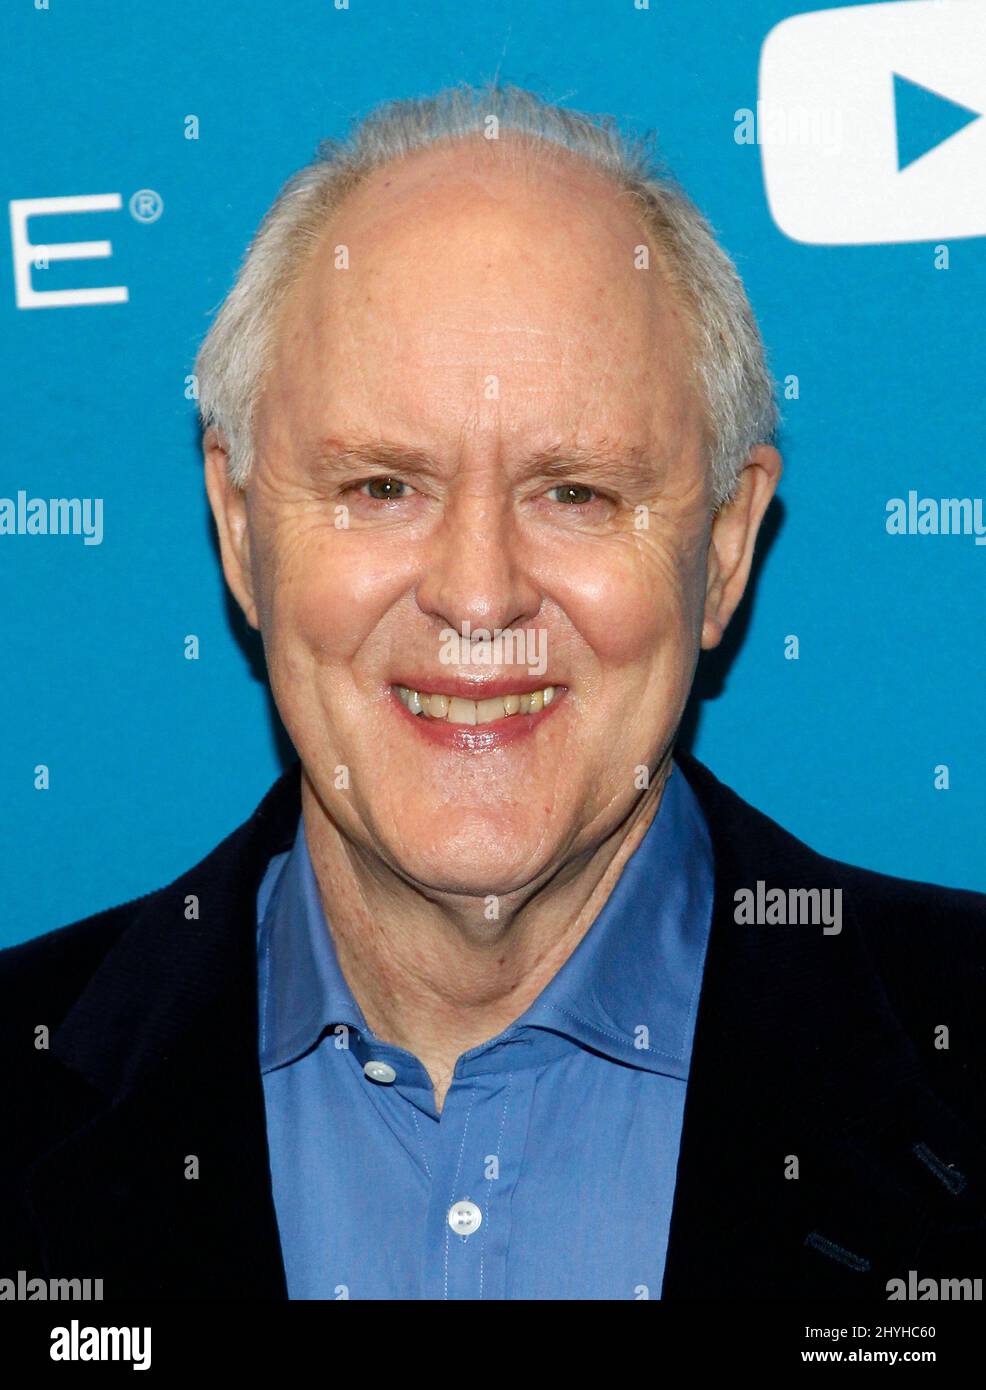 John Lithgow at the special screening of 'Tomorrow Man' during the 2019 Sundance Film Festival held at the Eccles Theatre on January 30, 2019 in Park City, Utah. Stock Photo